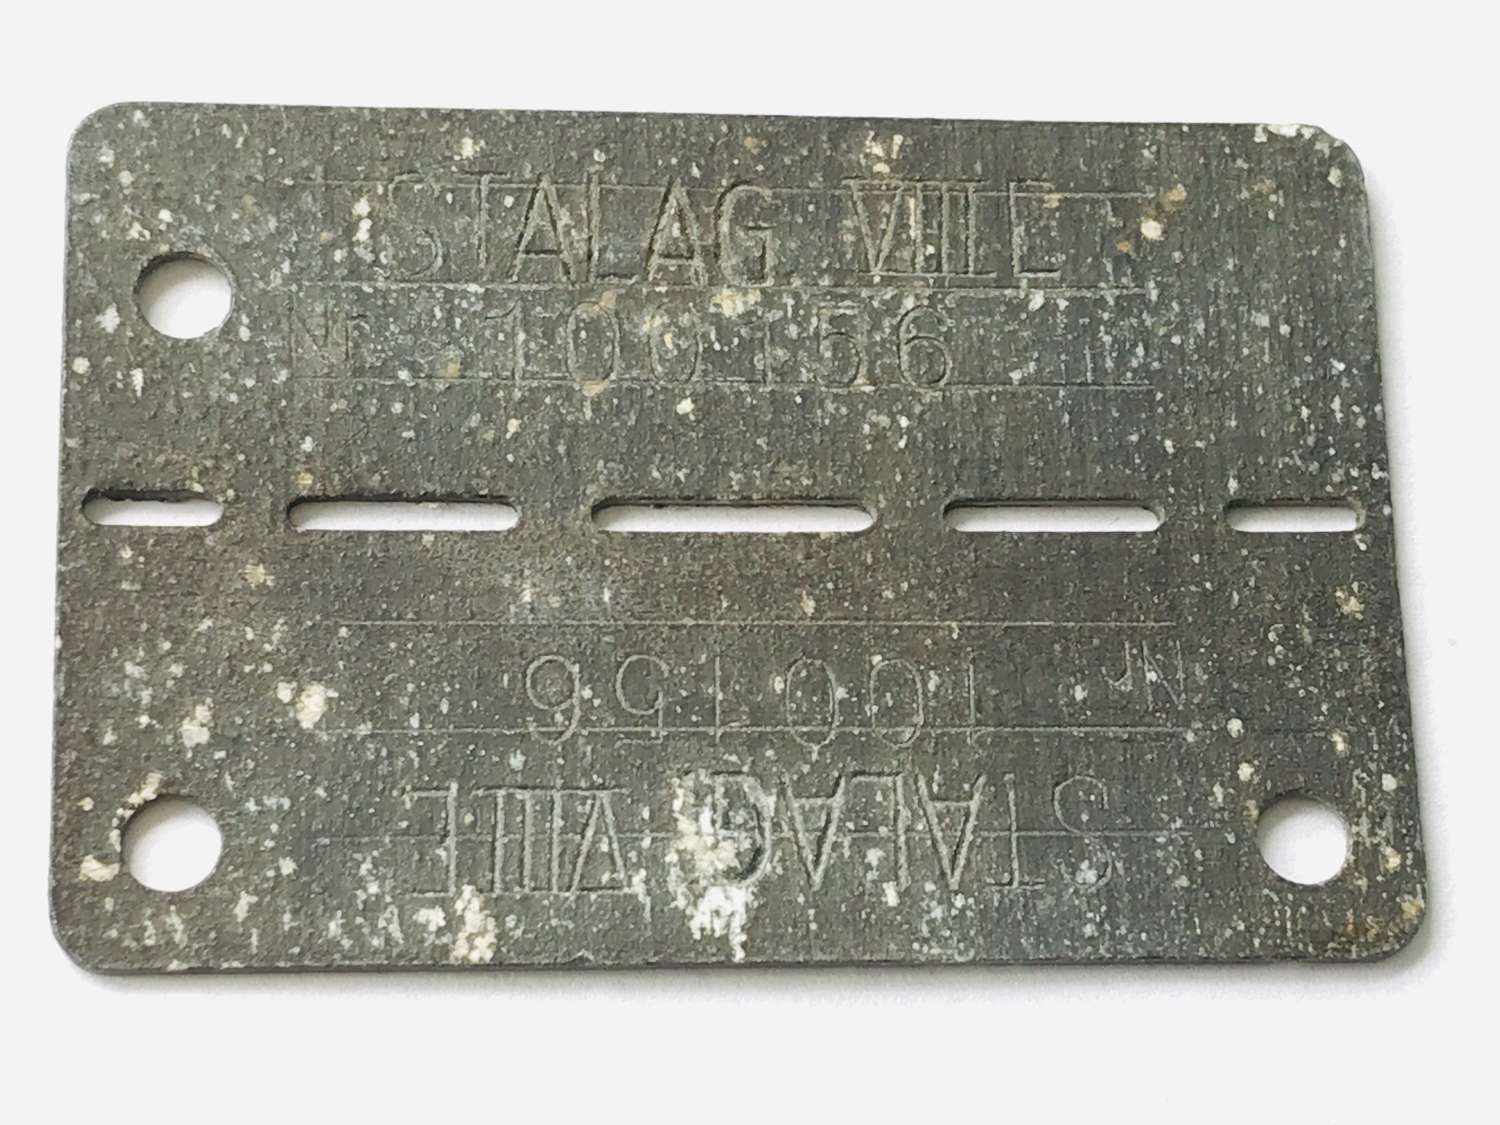 German issue POW ID tag for Stalag V111